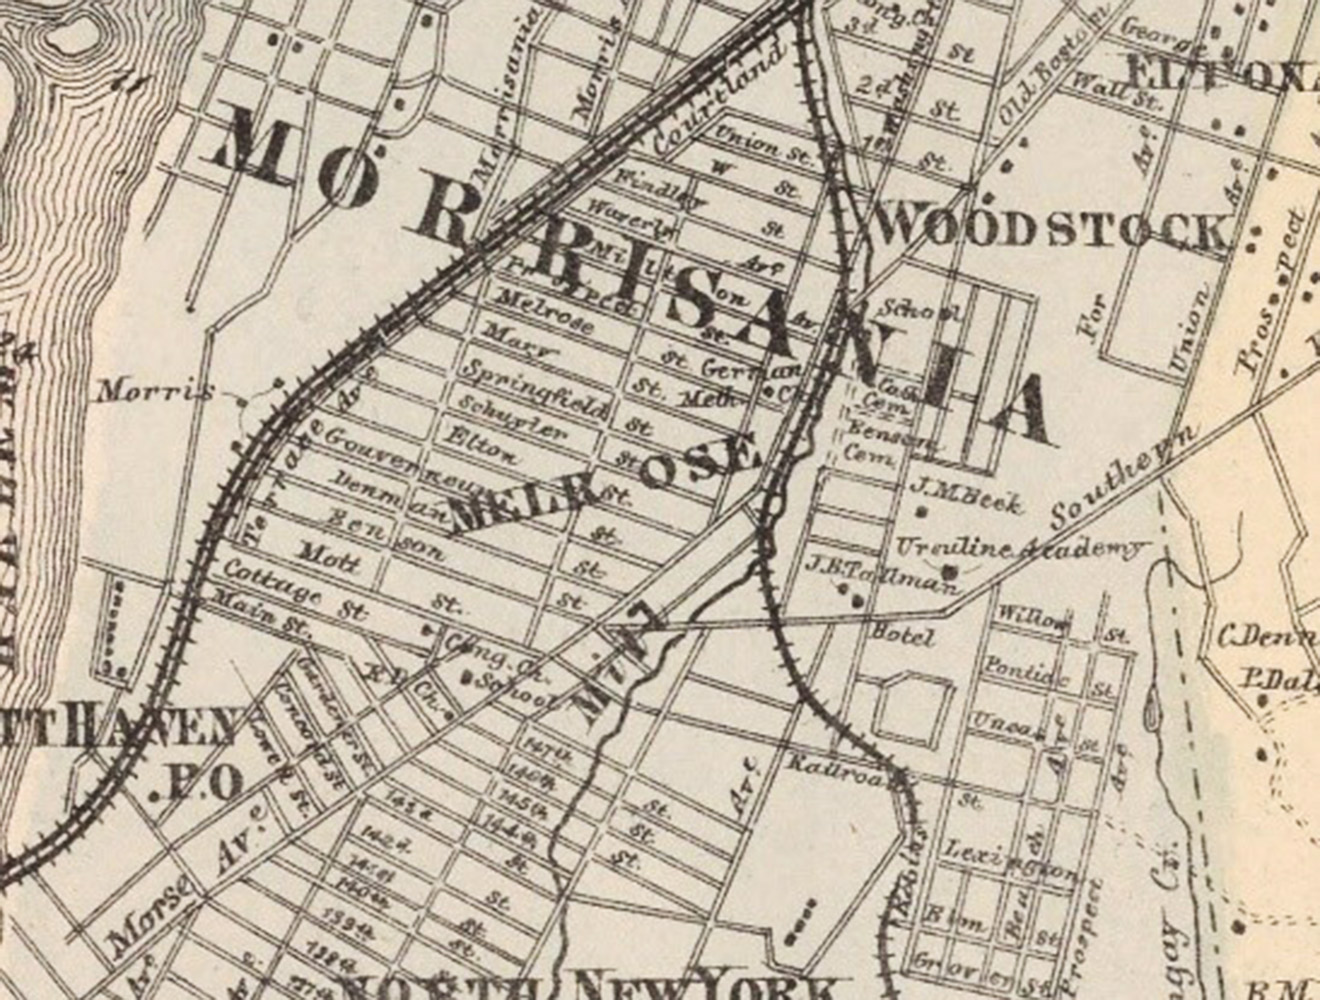 Plan view of Westchester